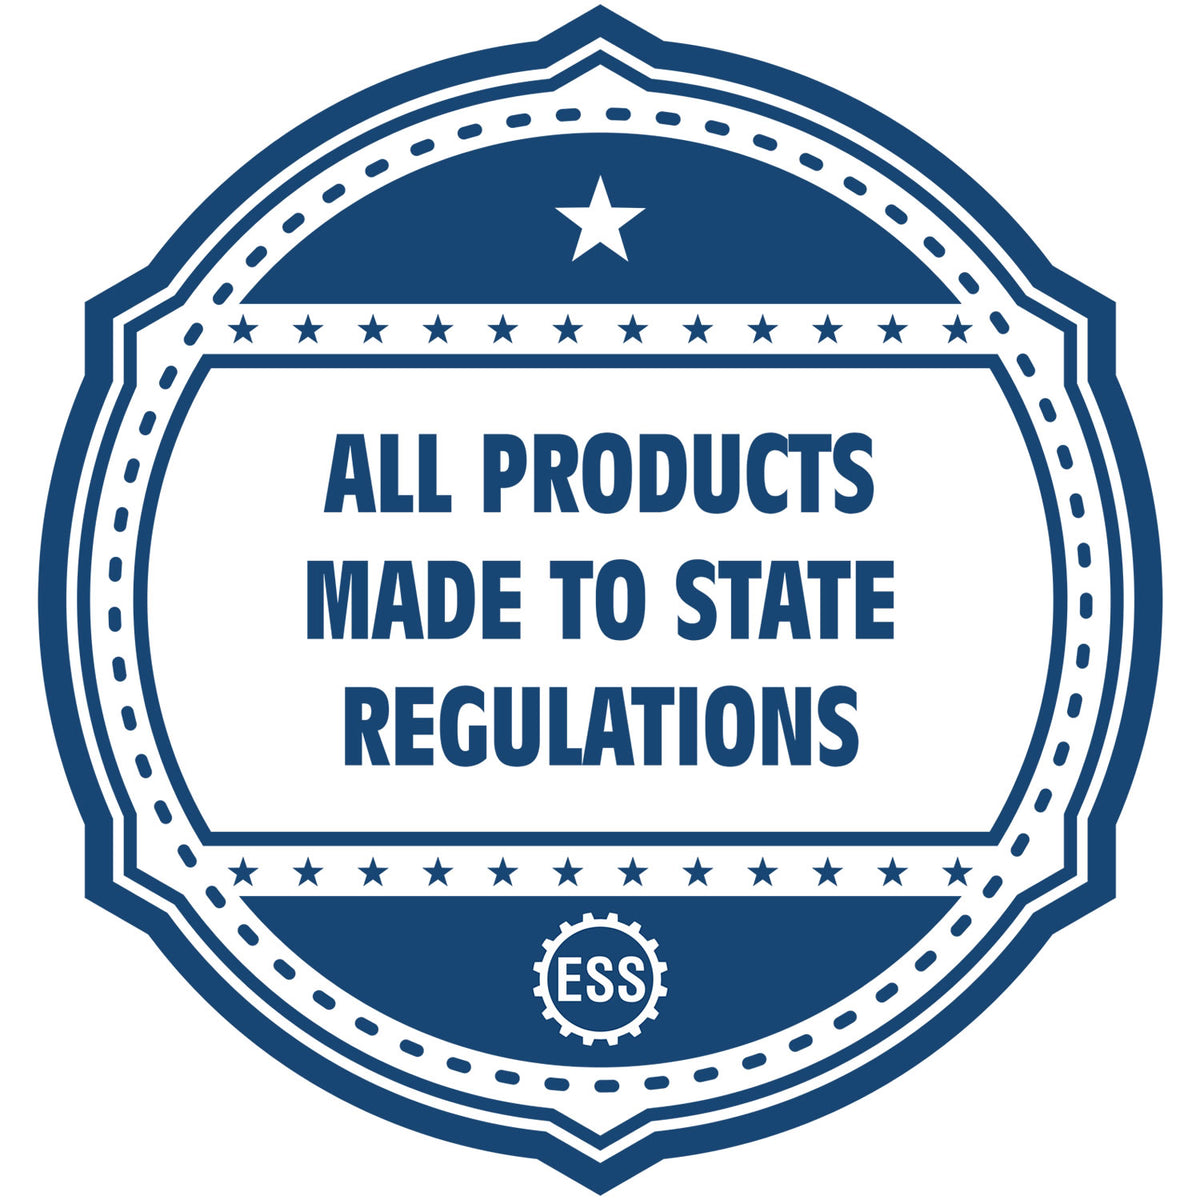 An icon or badge element for the Slim Pre-Inked Illinois Professional Engineer Seal Stamp showing that this product is made in compliance with state regulations.